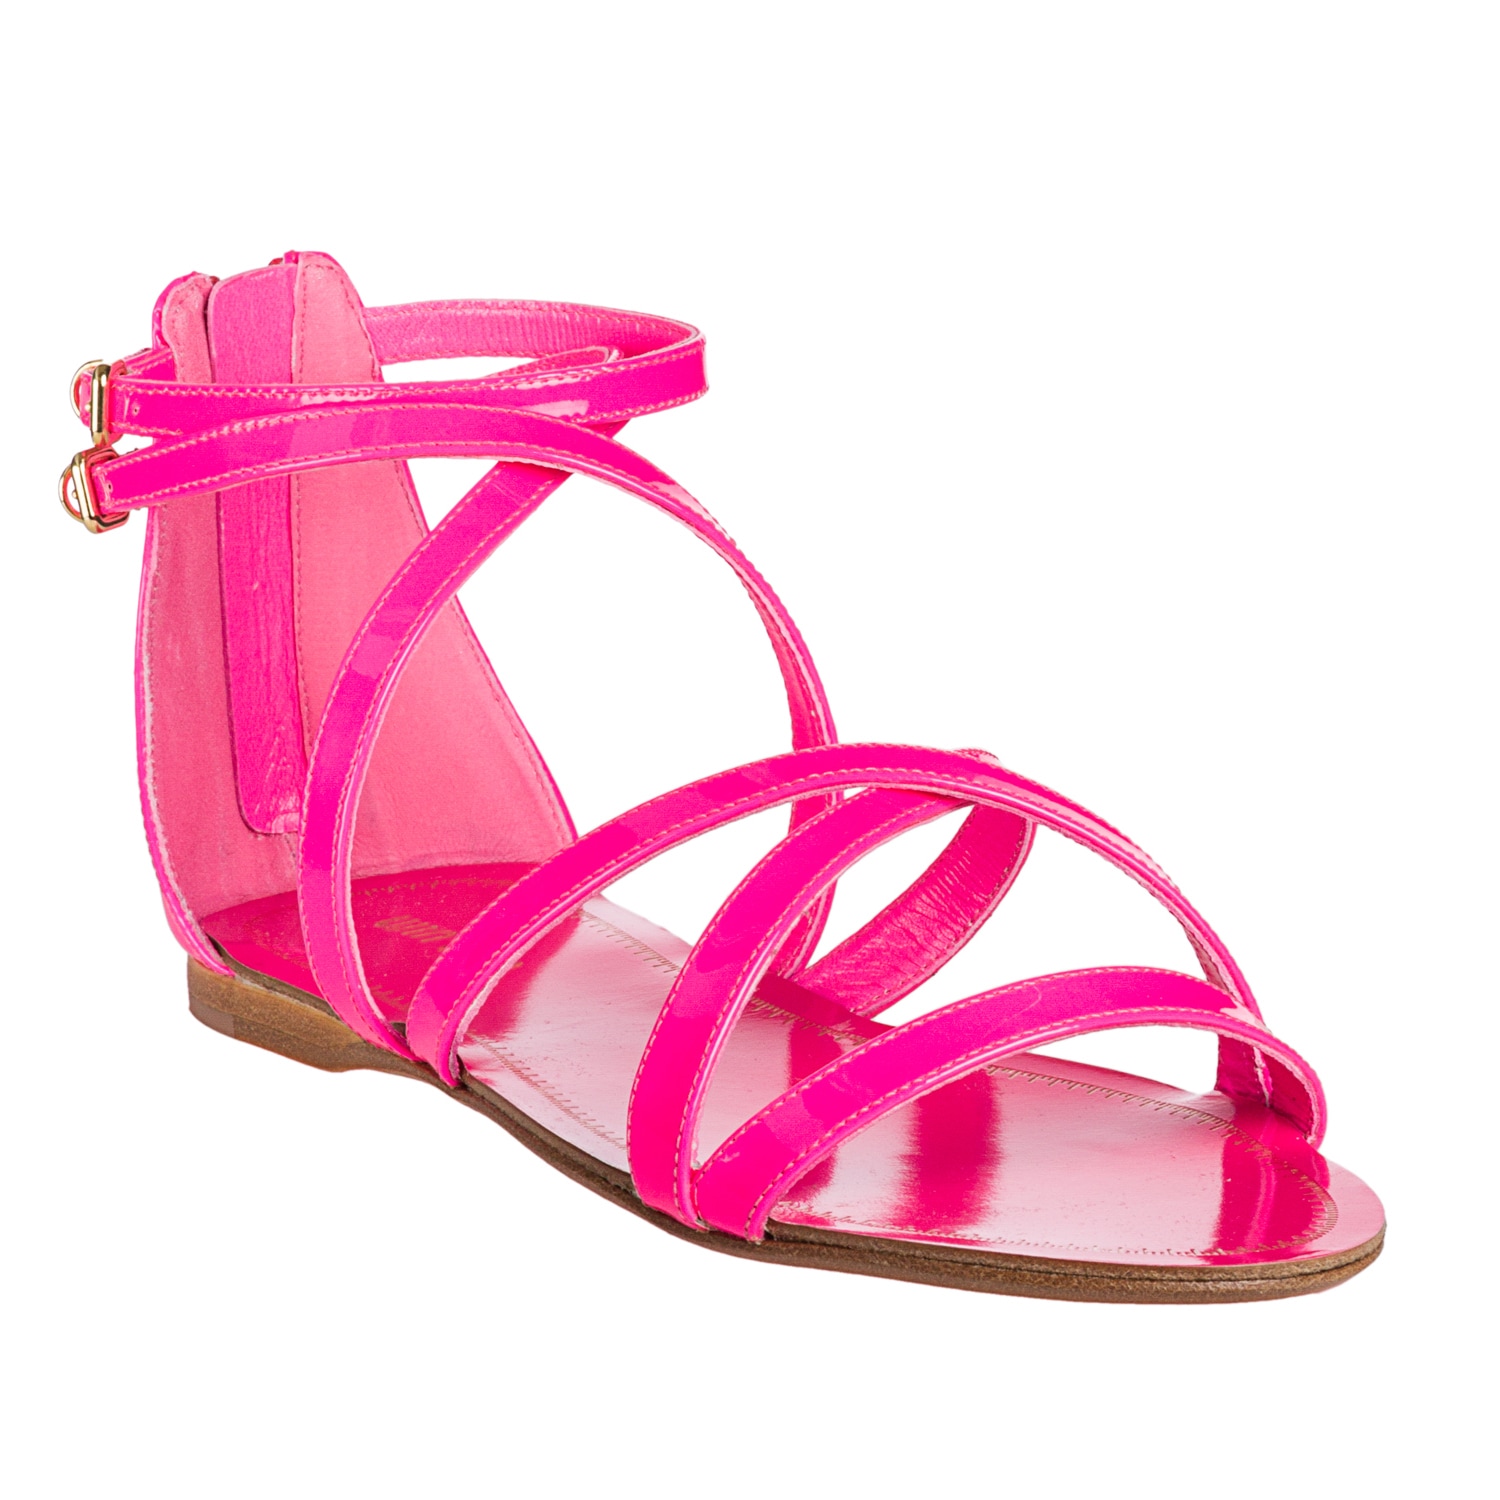 Miu Miu Womens Neon Pink Patent Leather Strappy Flat Sandals Today $